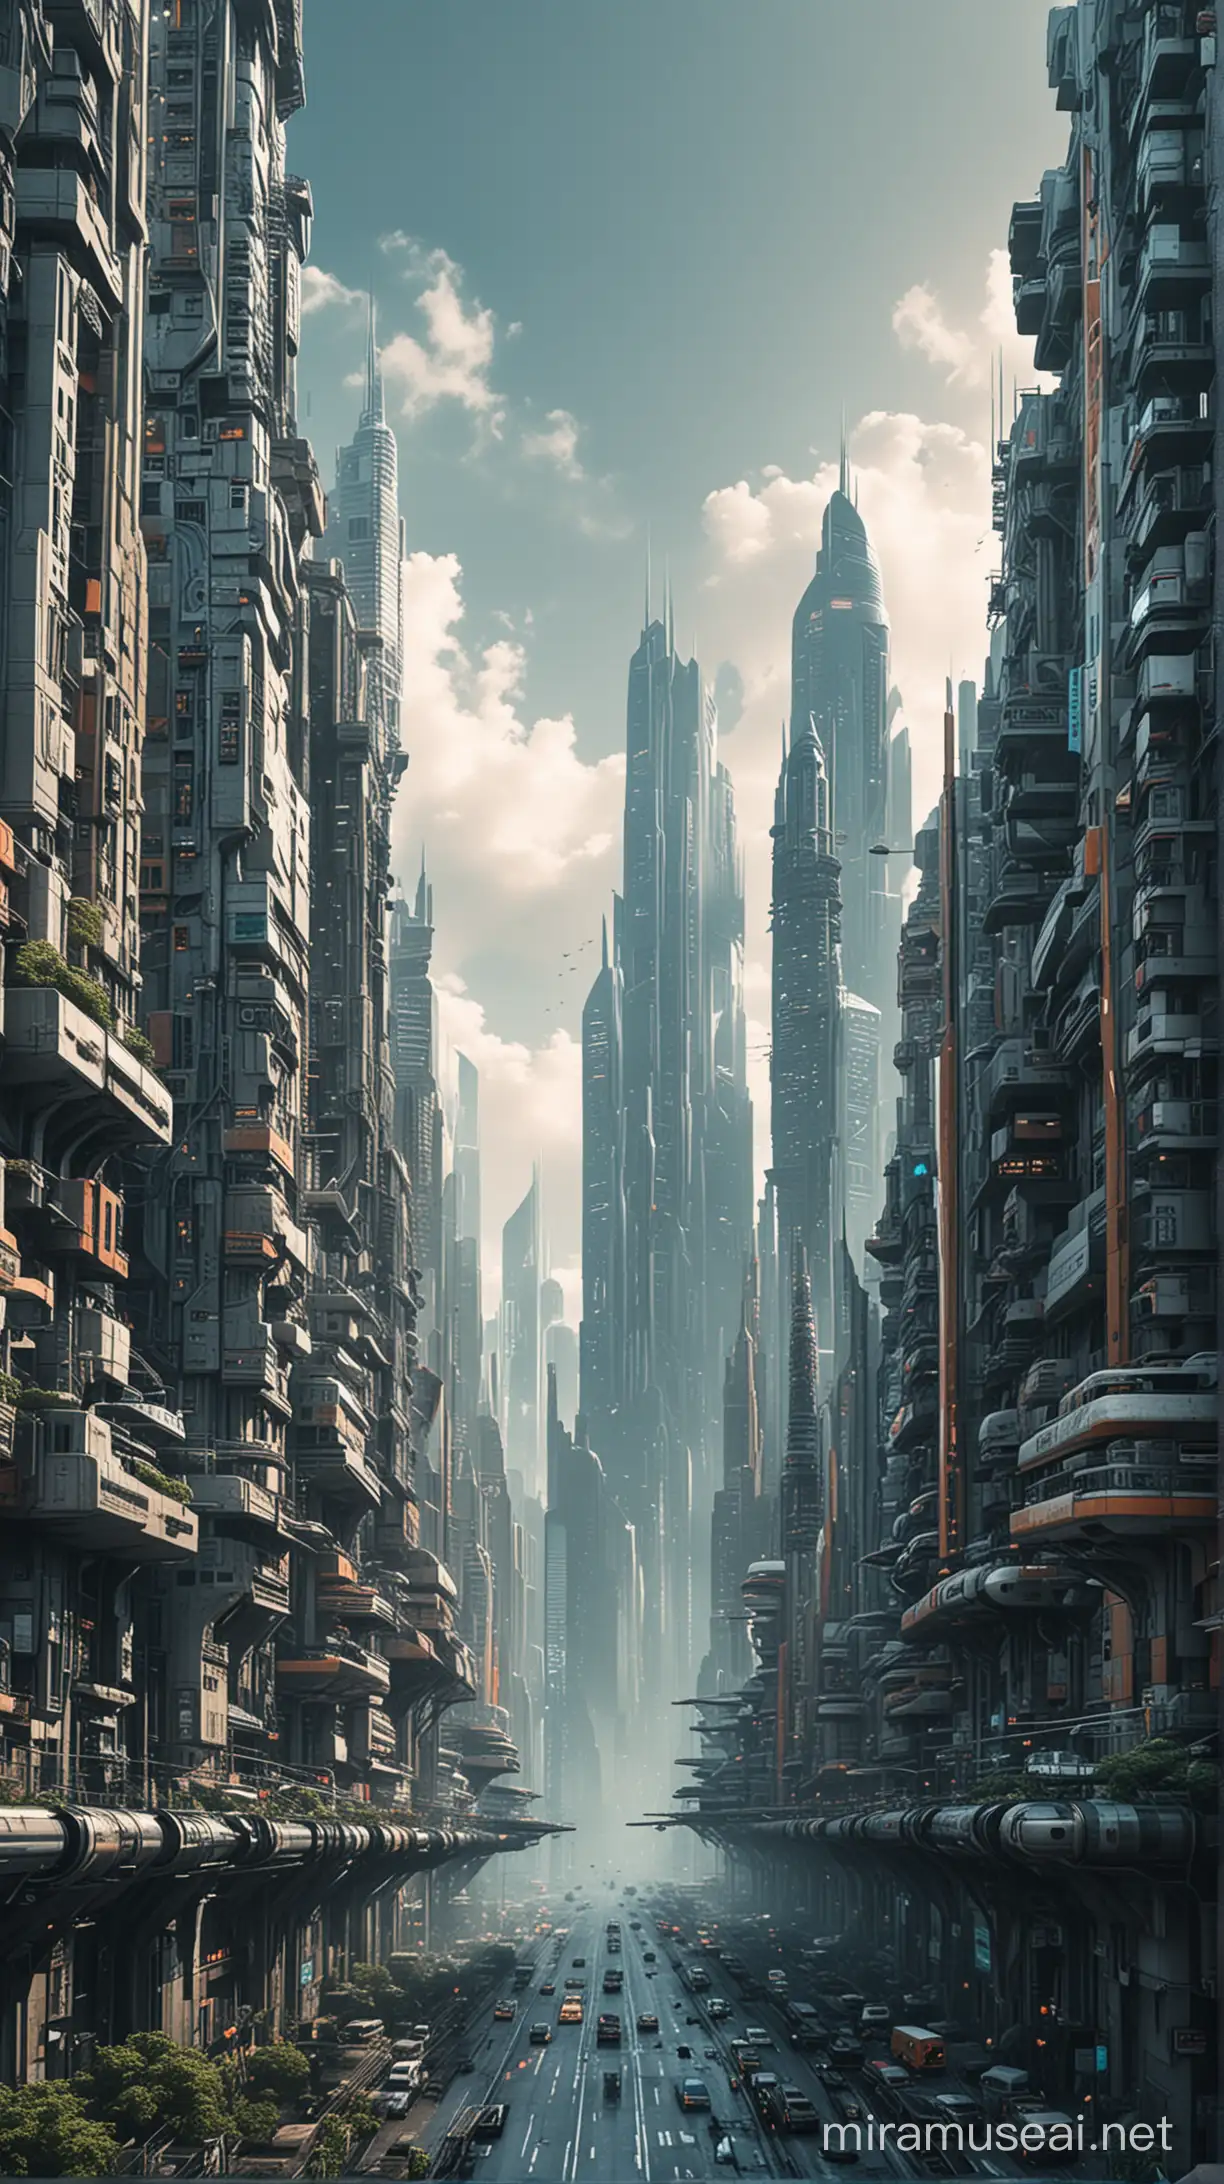 a futuristic cityscape, buildings intact and unblemished
